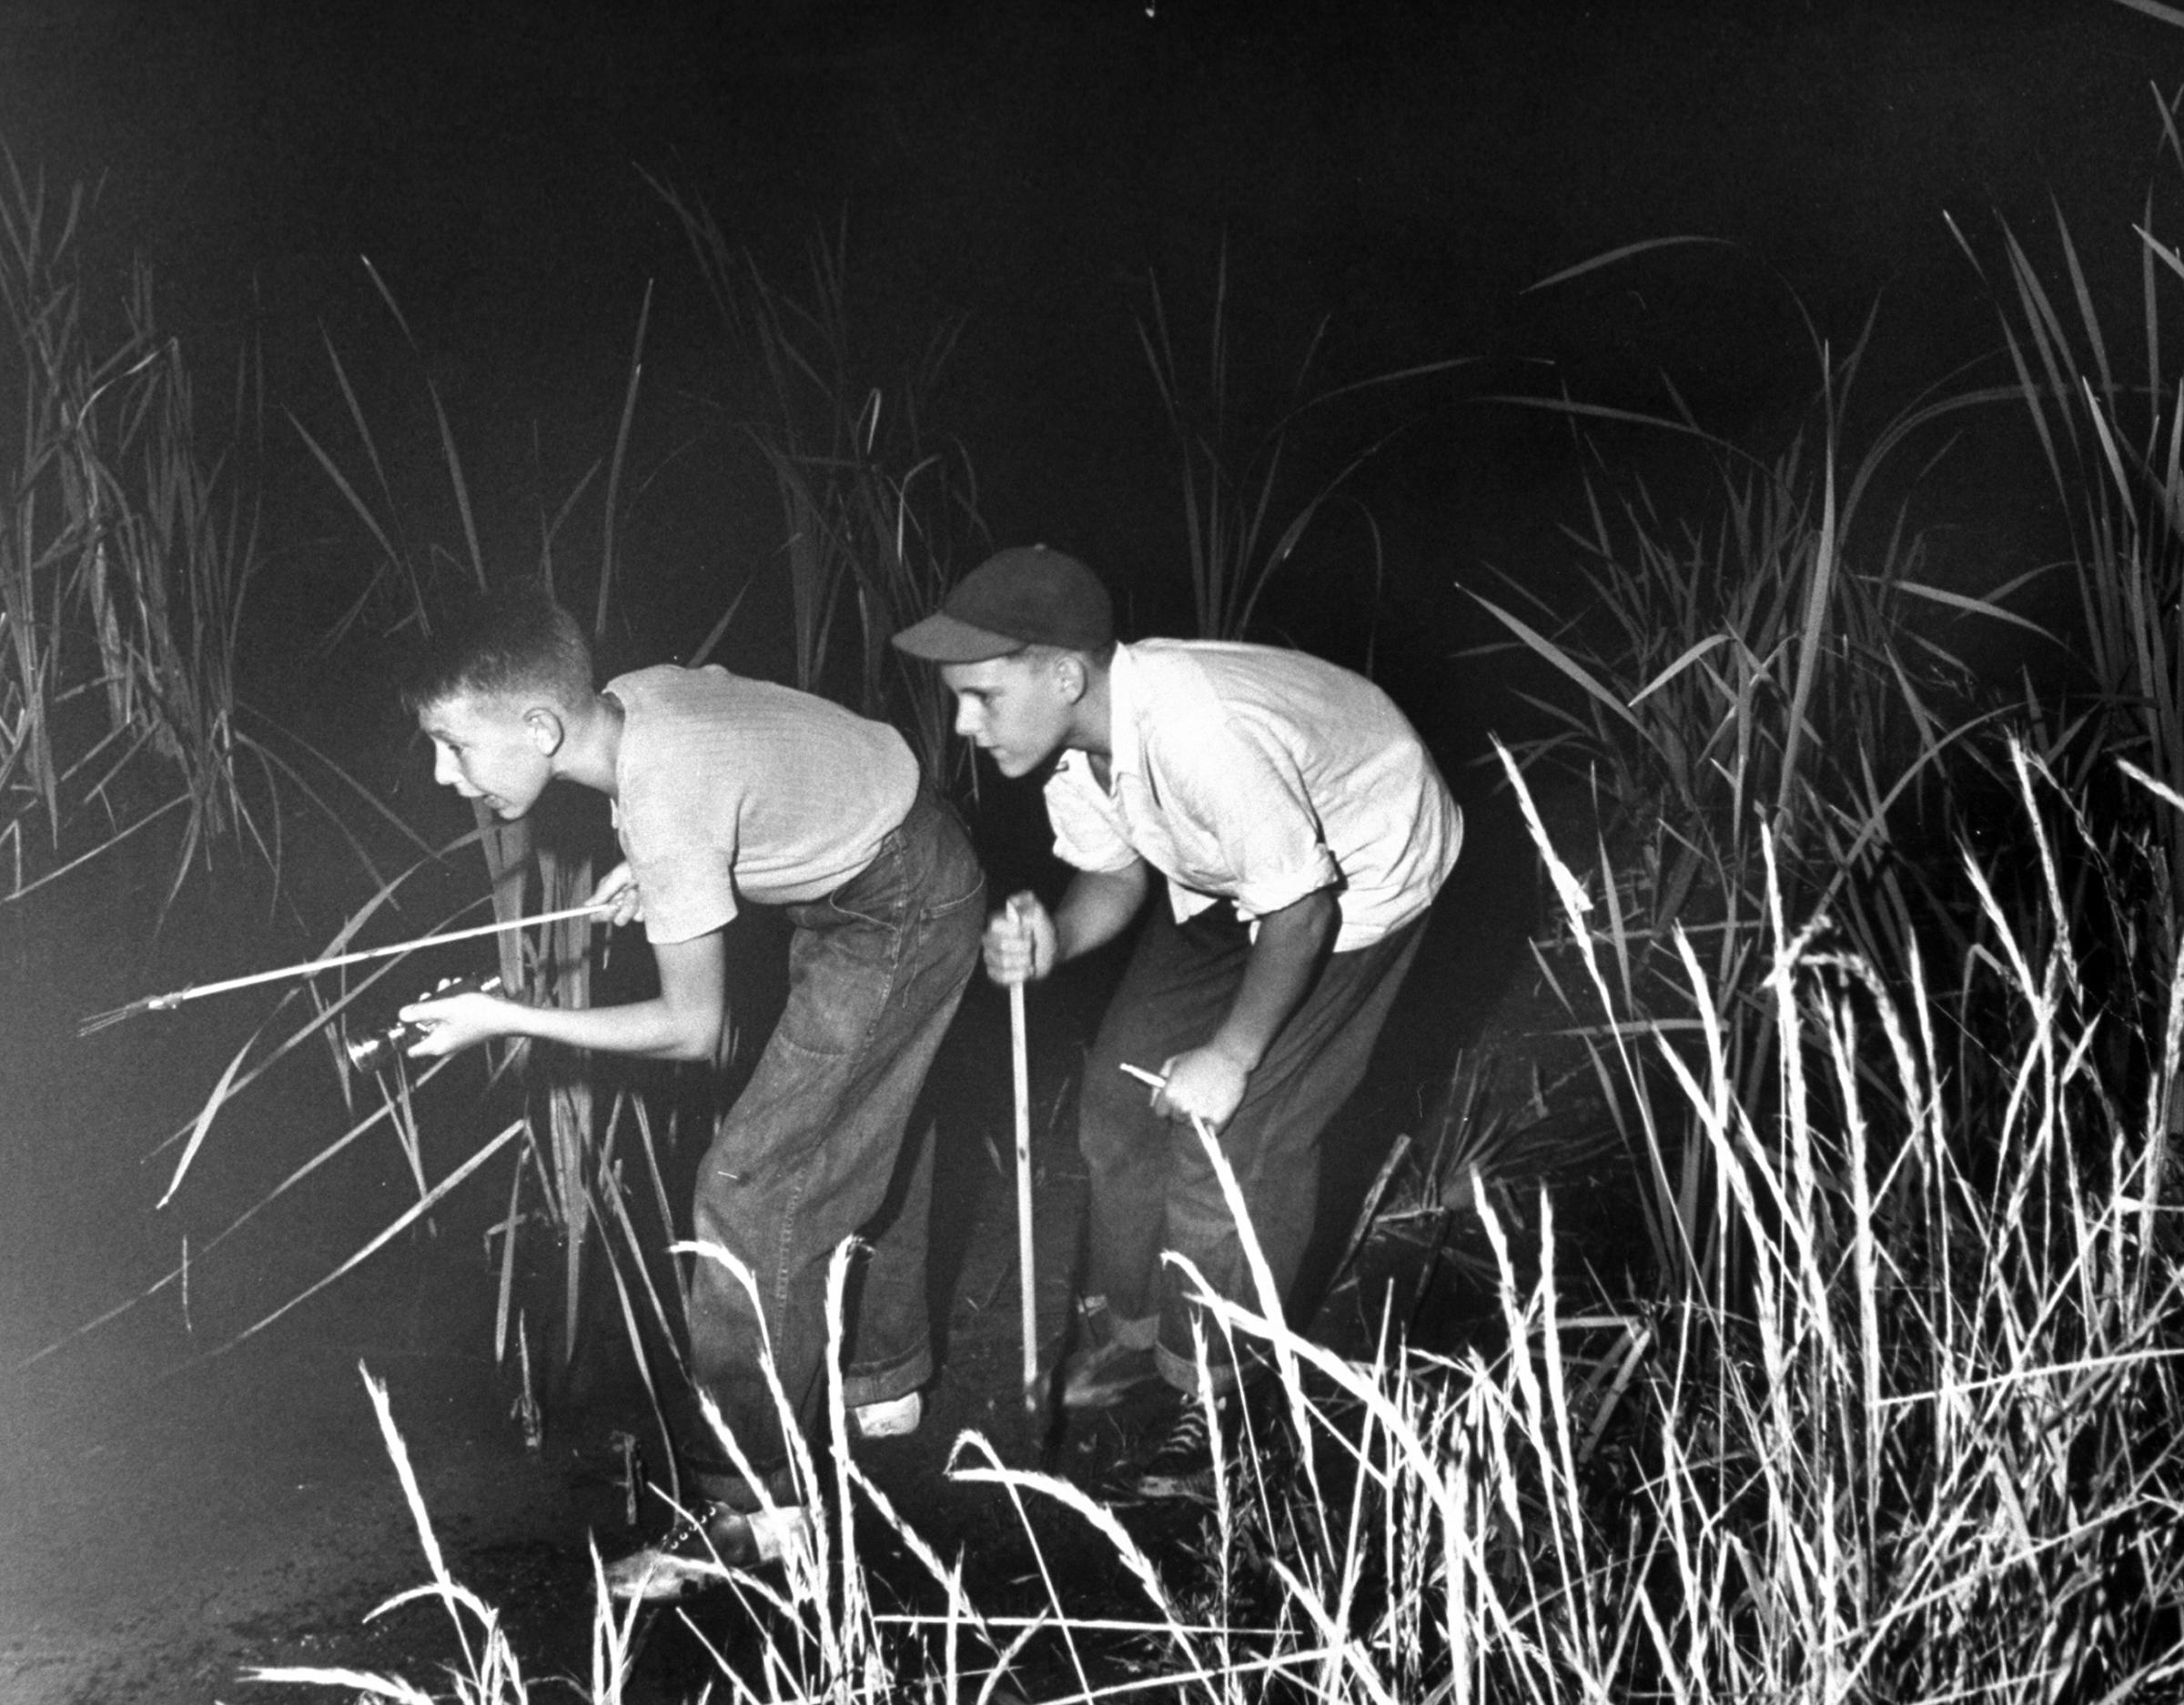 Frog gigging in the pond behind his house, Pres carries a spear and flashlight. "Hey, Mac, there's one," he yells. But when he caught it, it turned out to be a crawfish.